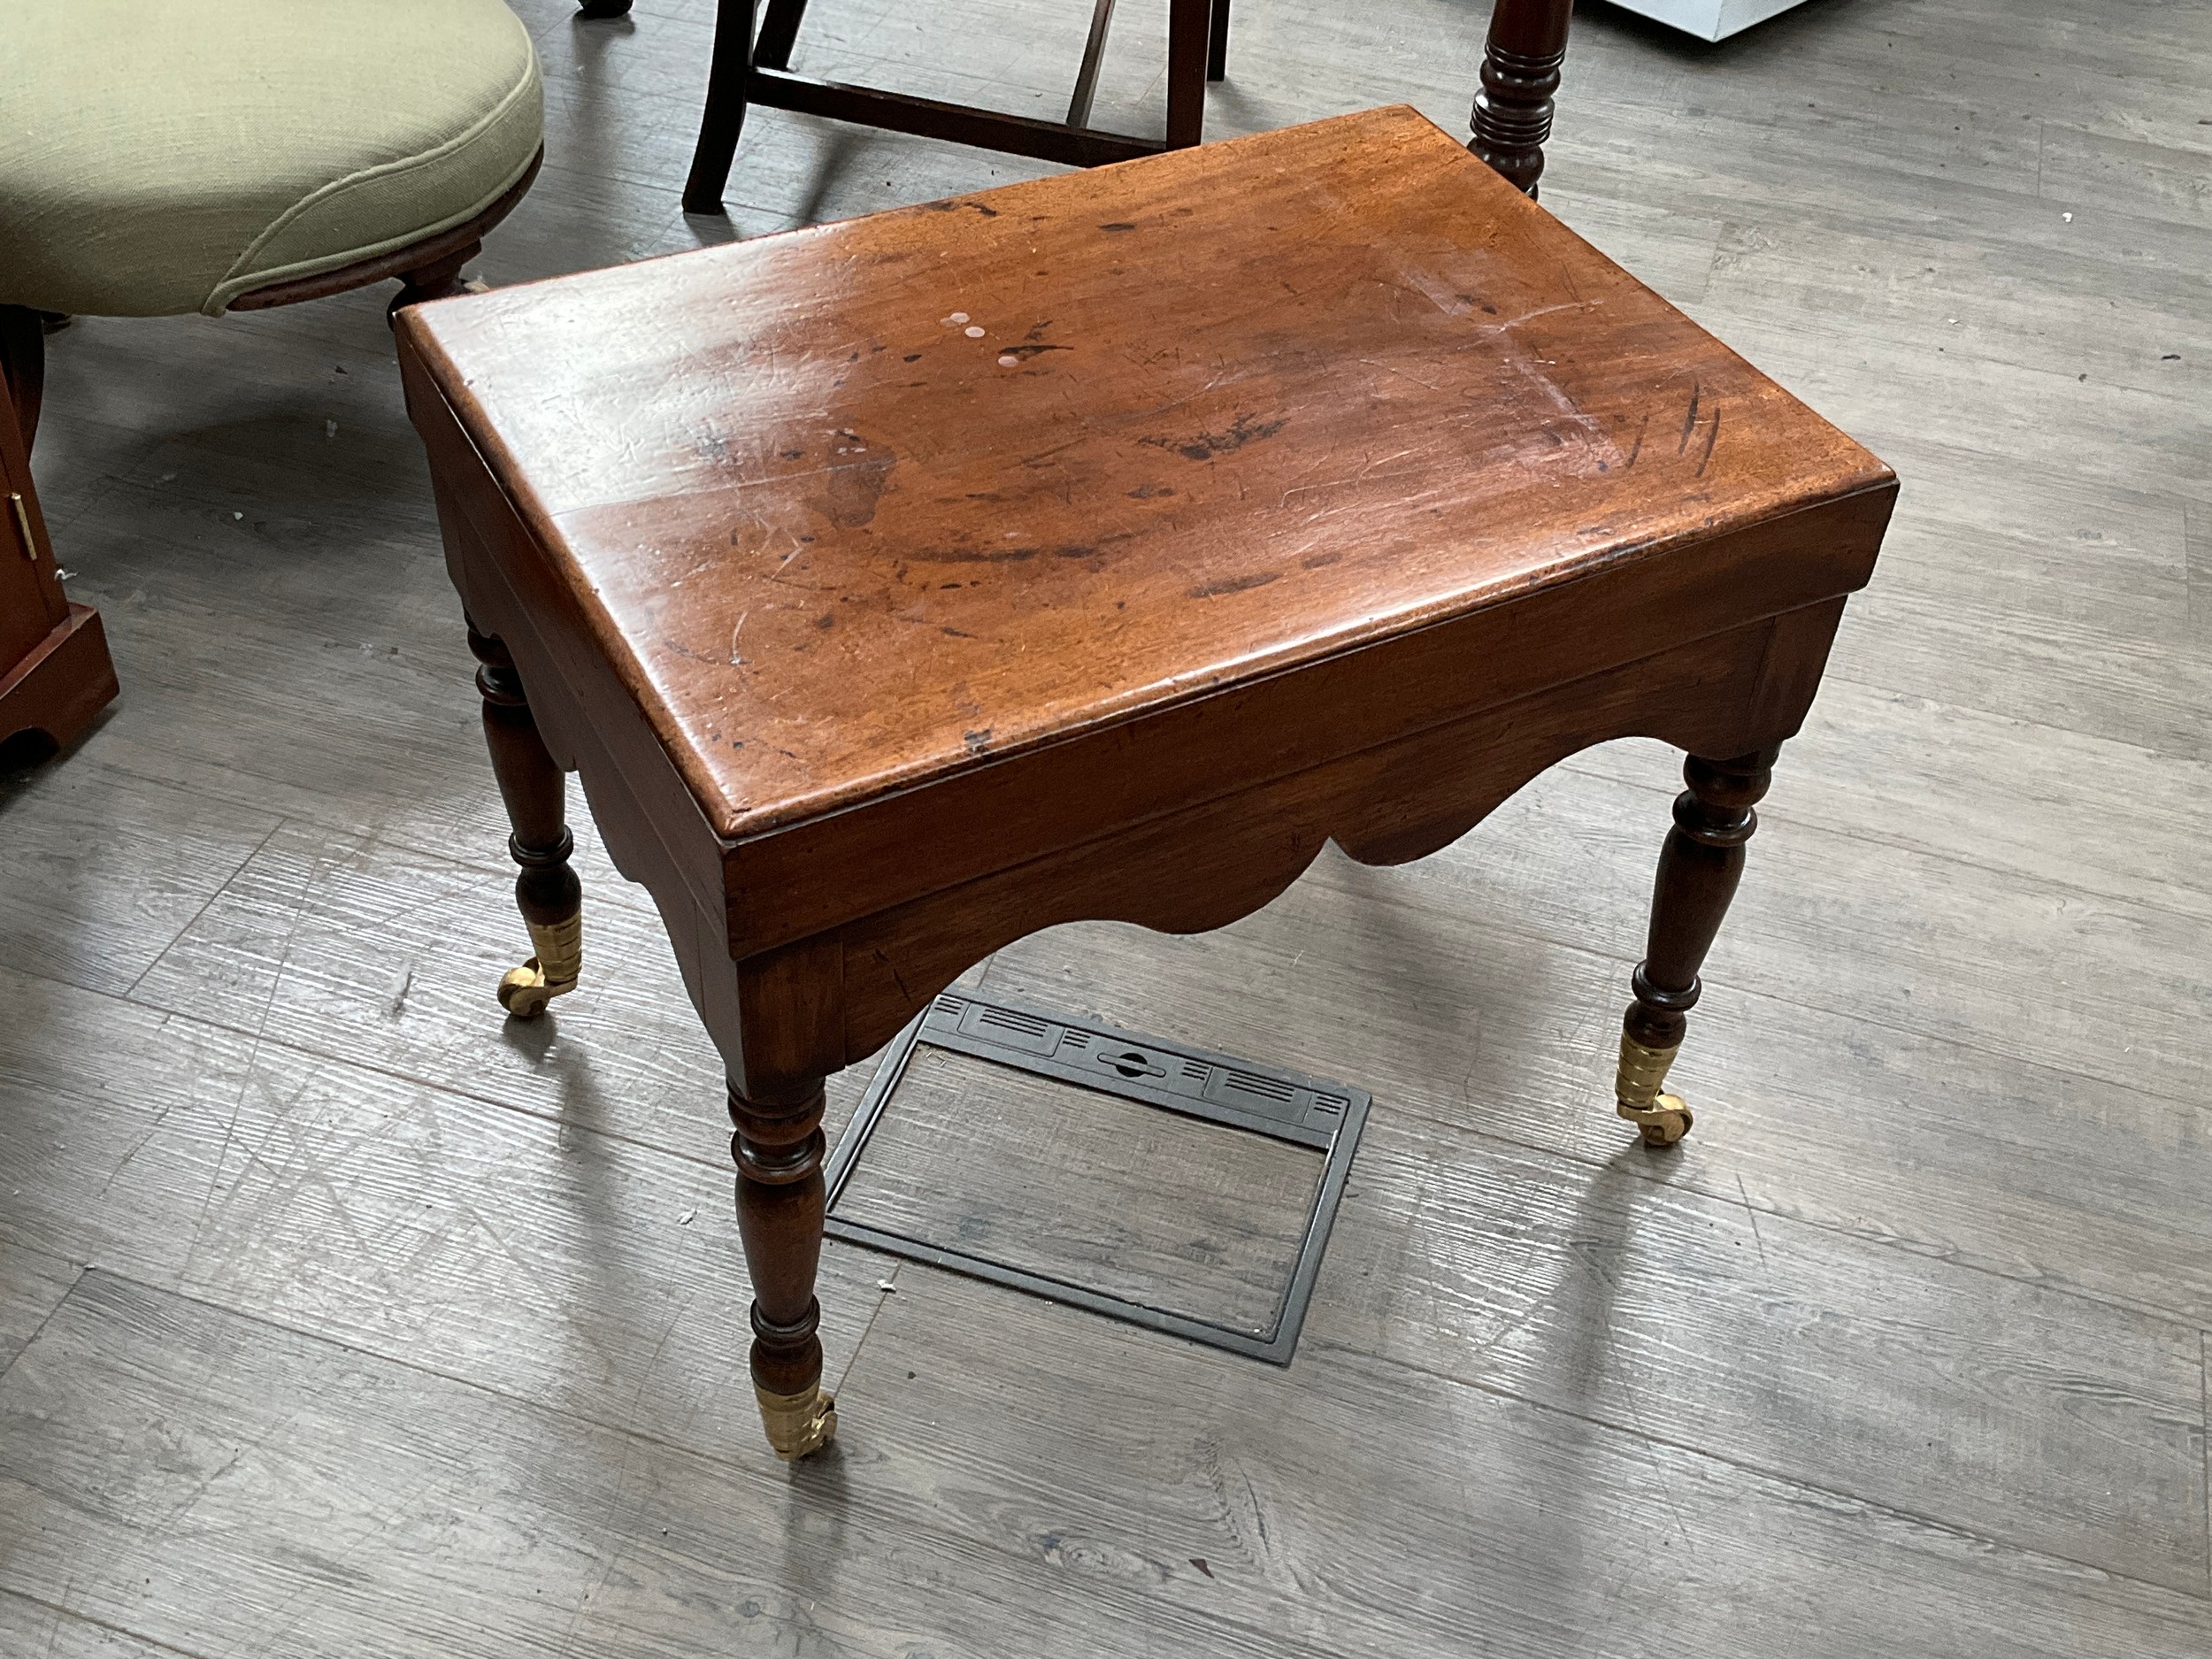 A 19th Century mahogany commode converted to a table with brass castors